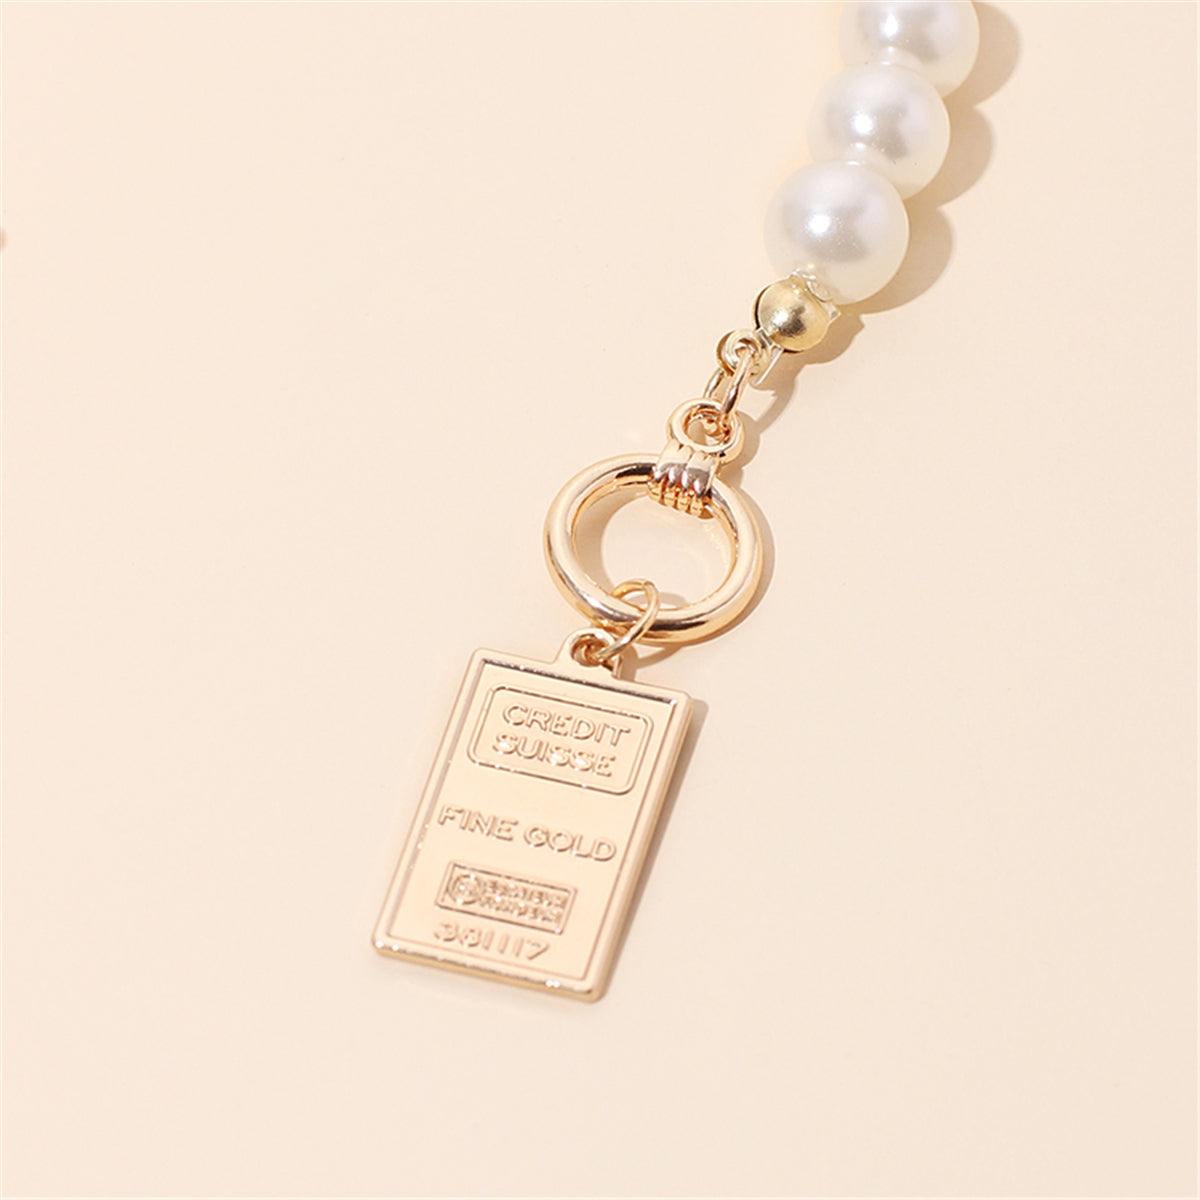 Pearl & 18K Gold-Plated Beaded Card Pendant Necklace